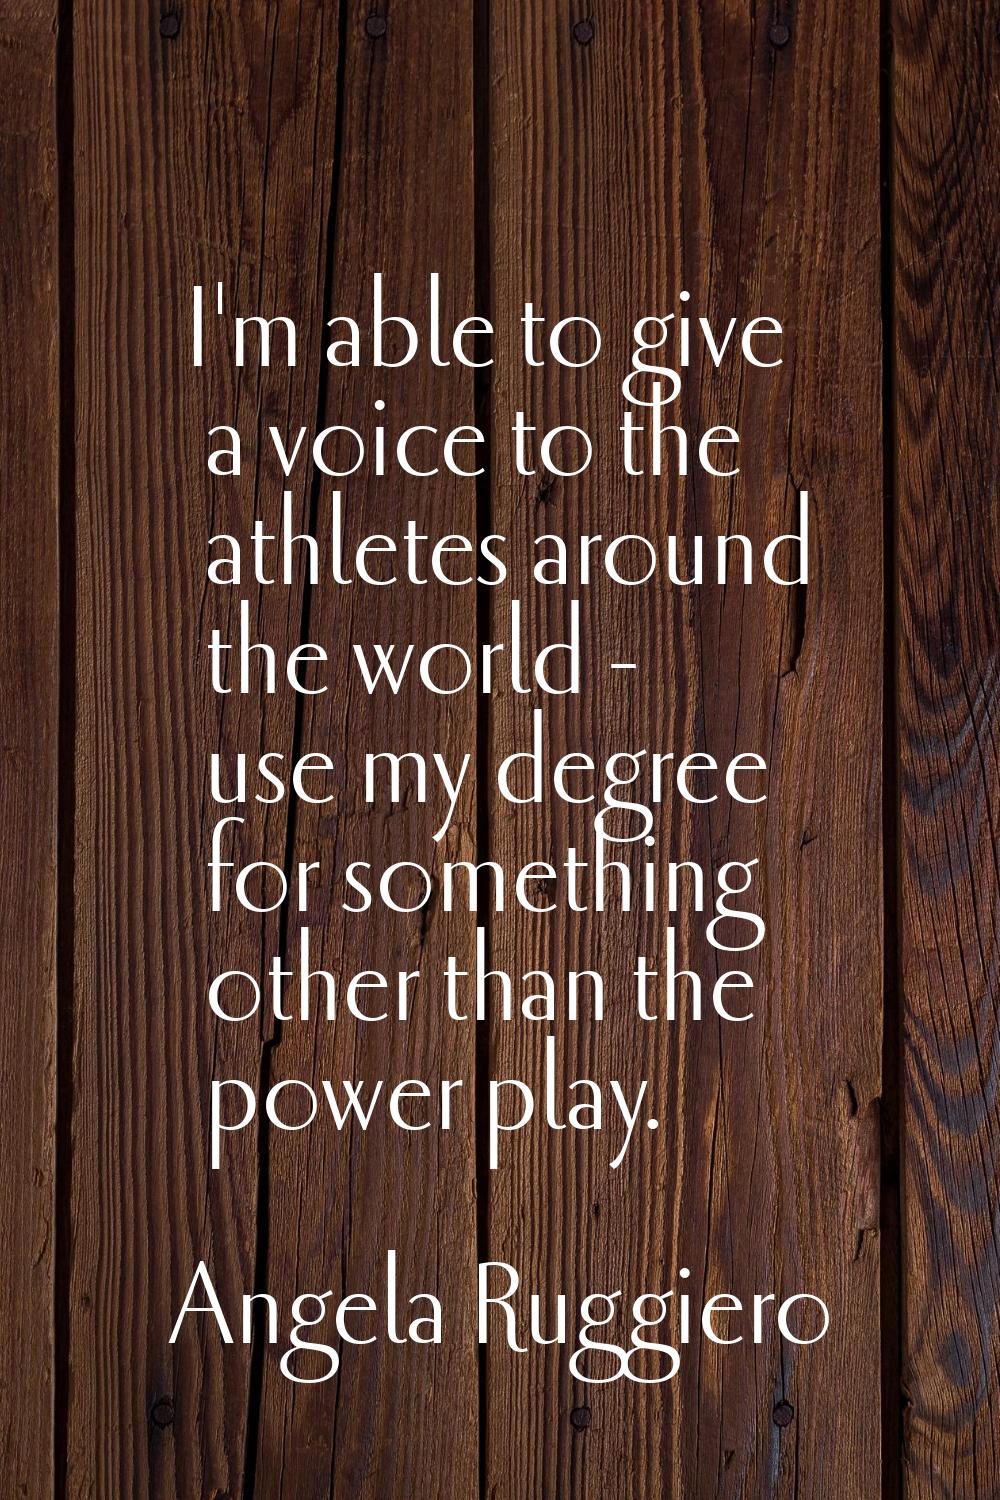 I'm able to give a voice to the athletes around the world - use my degree for something other than 